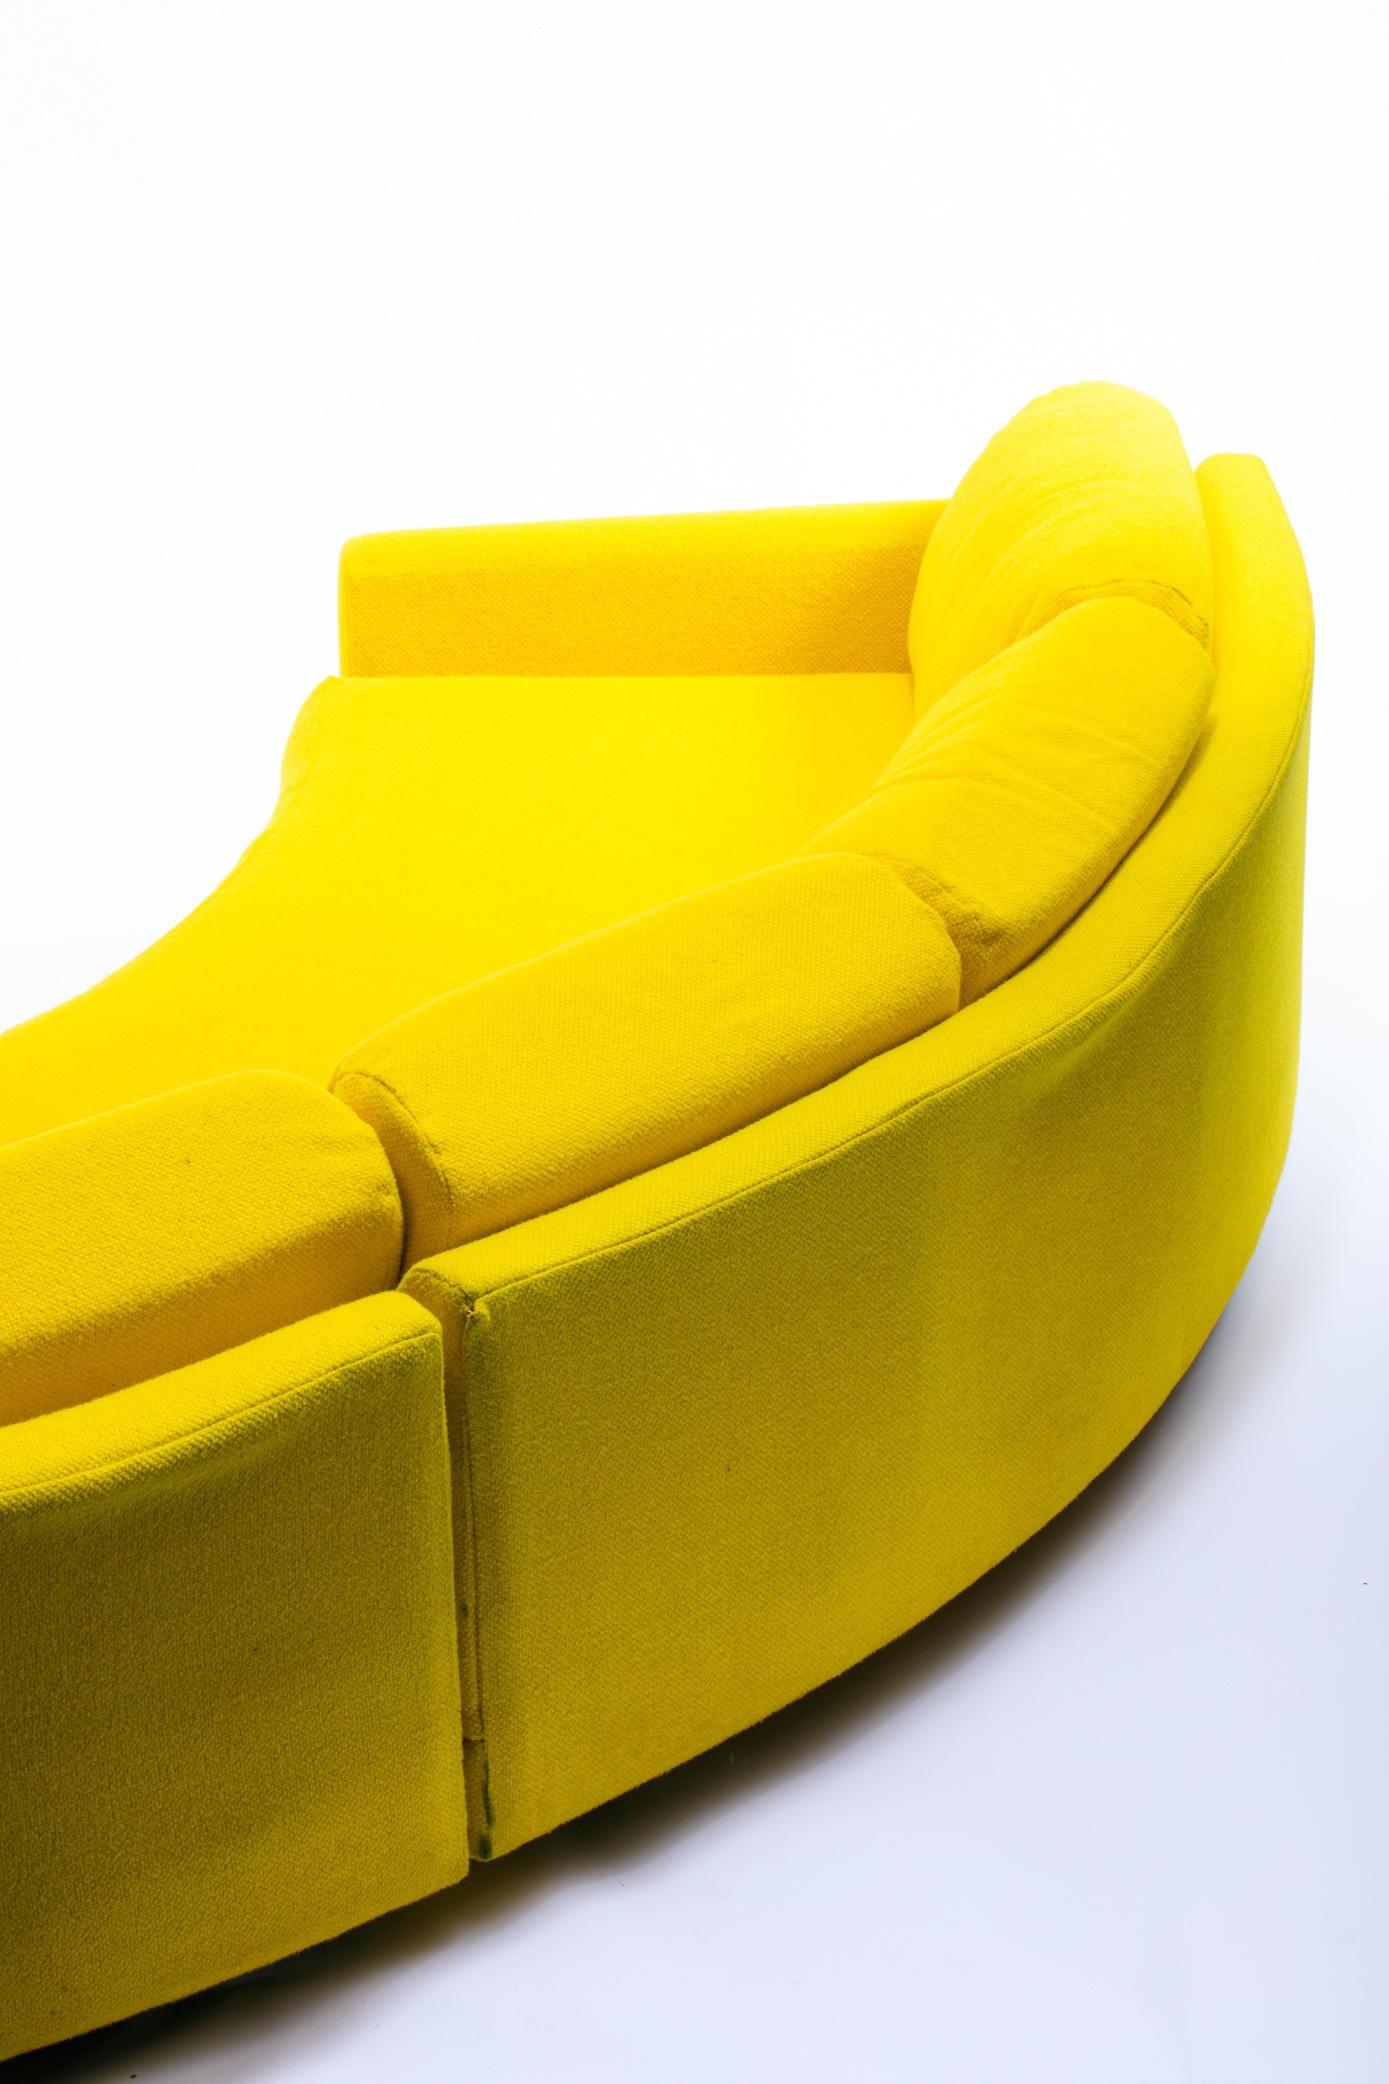 Mid-Century Modern Adrian Pearsall Pit Style Yellow Semi-Circular Sofa 3 Piece Sectional For Sale